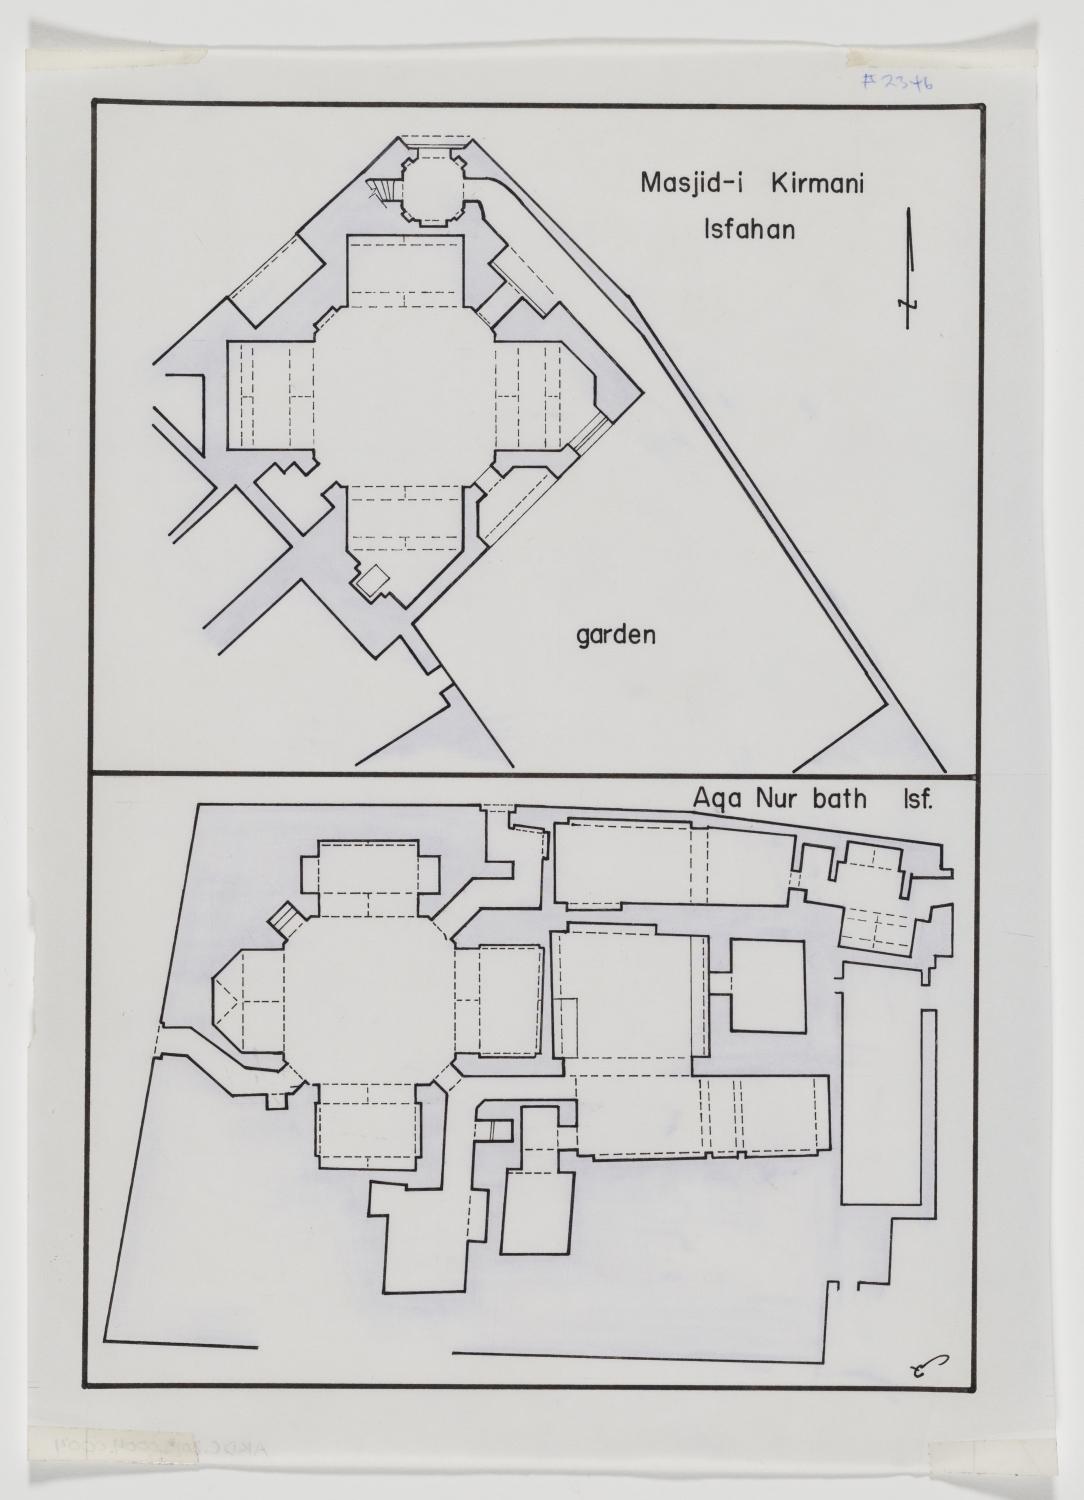 Plans comparing the form of the interior of the Masjid-i Kirmani to that of the Aqa Nur bath.